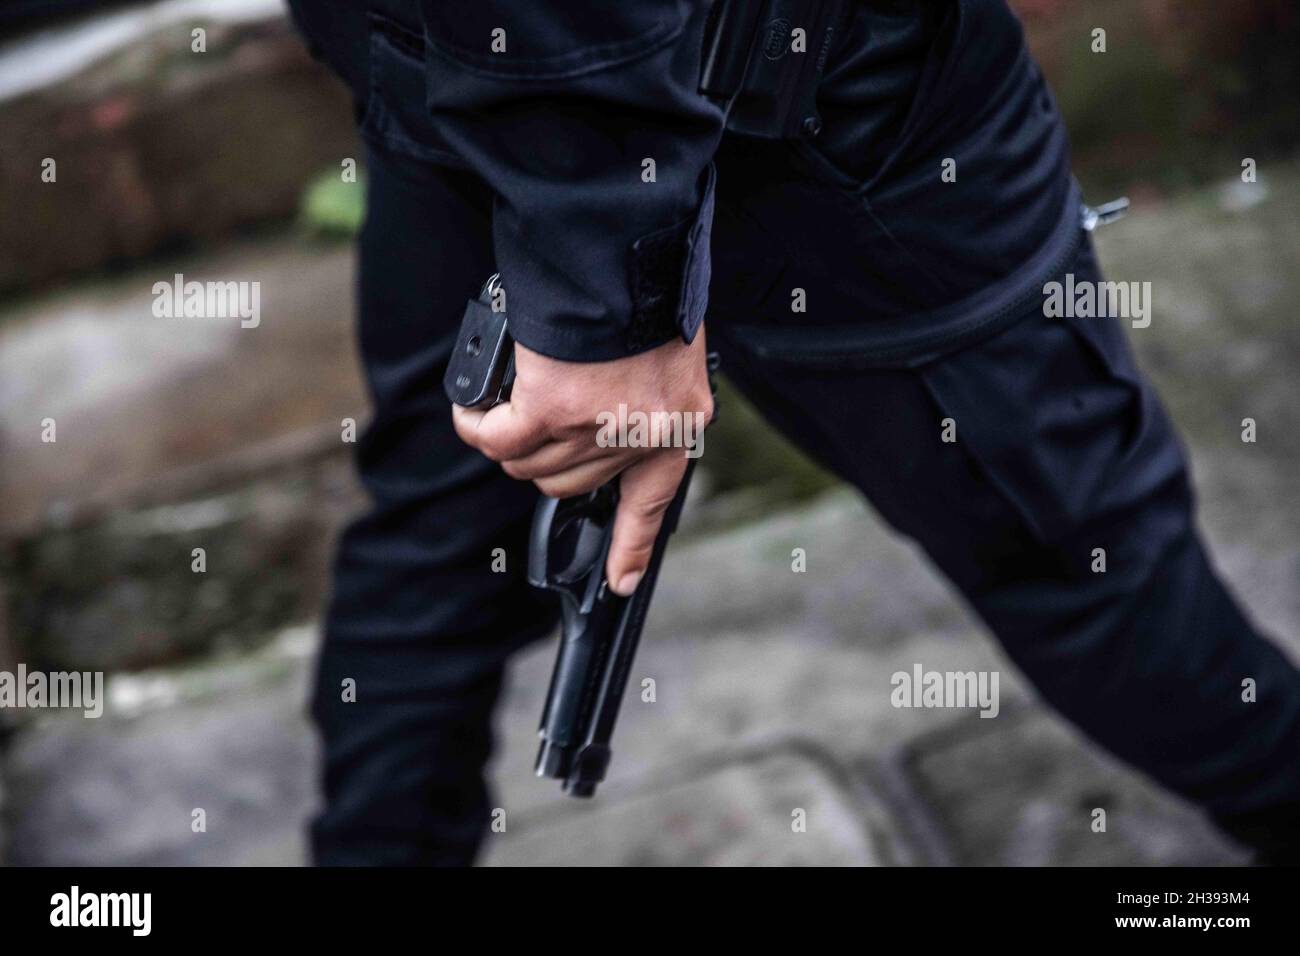 Guatemala City, Guatemala. 14th July, 2021. A member of Policia Nacional Civil with pistol drawn during a raid to arrest a member of the 18th street gang, which happened early in the morning. (Credit Image: © David Tesinsky/ZUMA Press Wire) Stock Photo